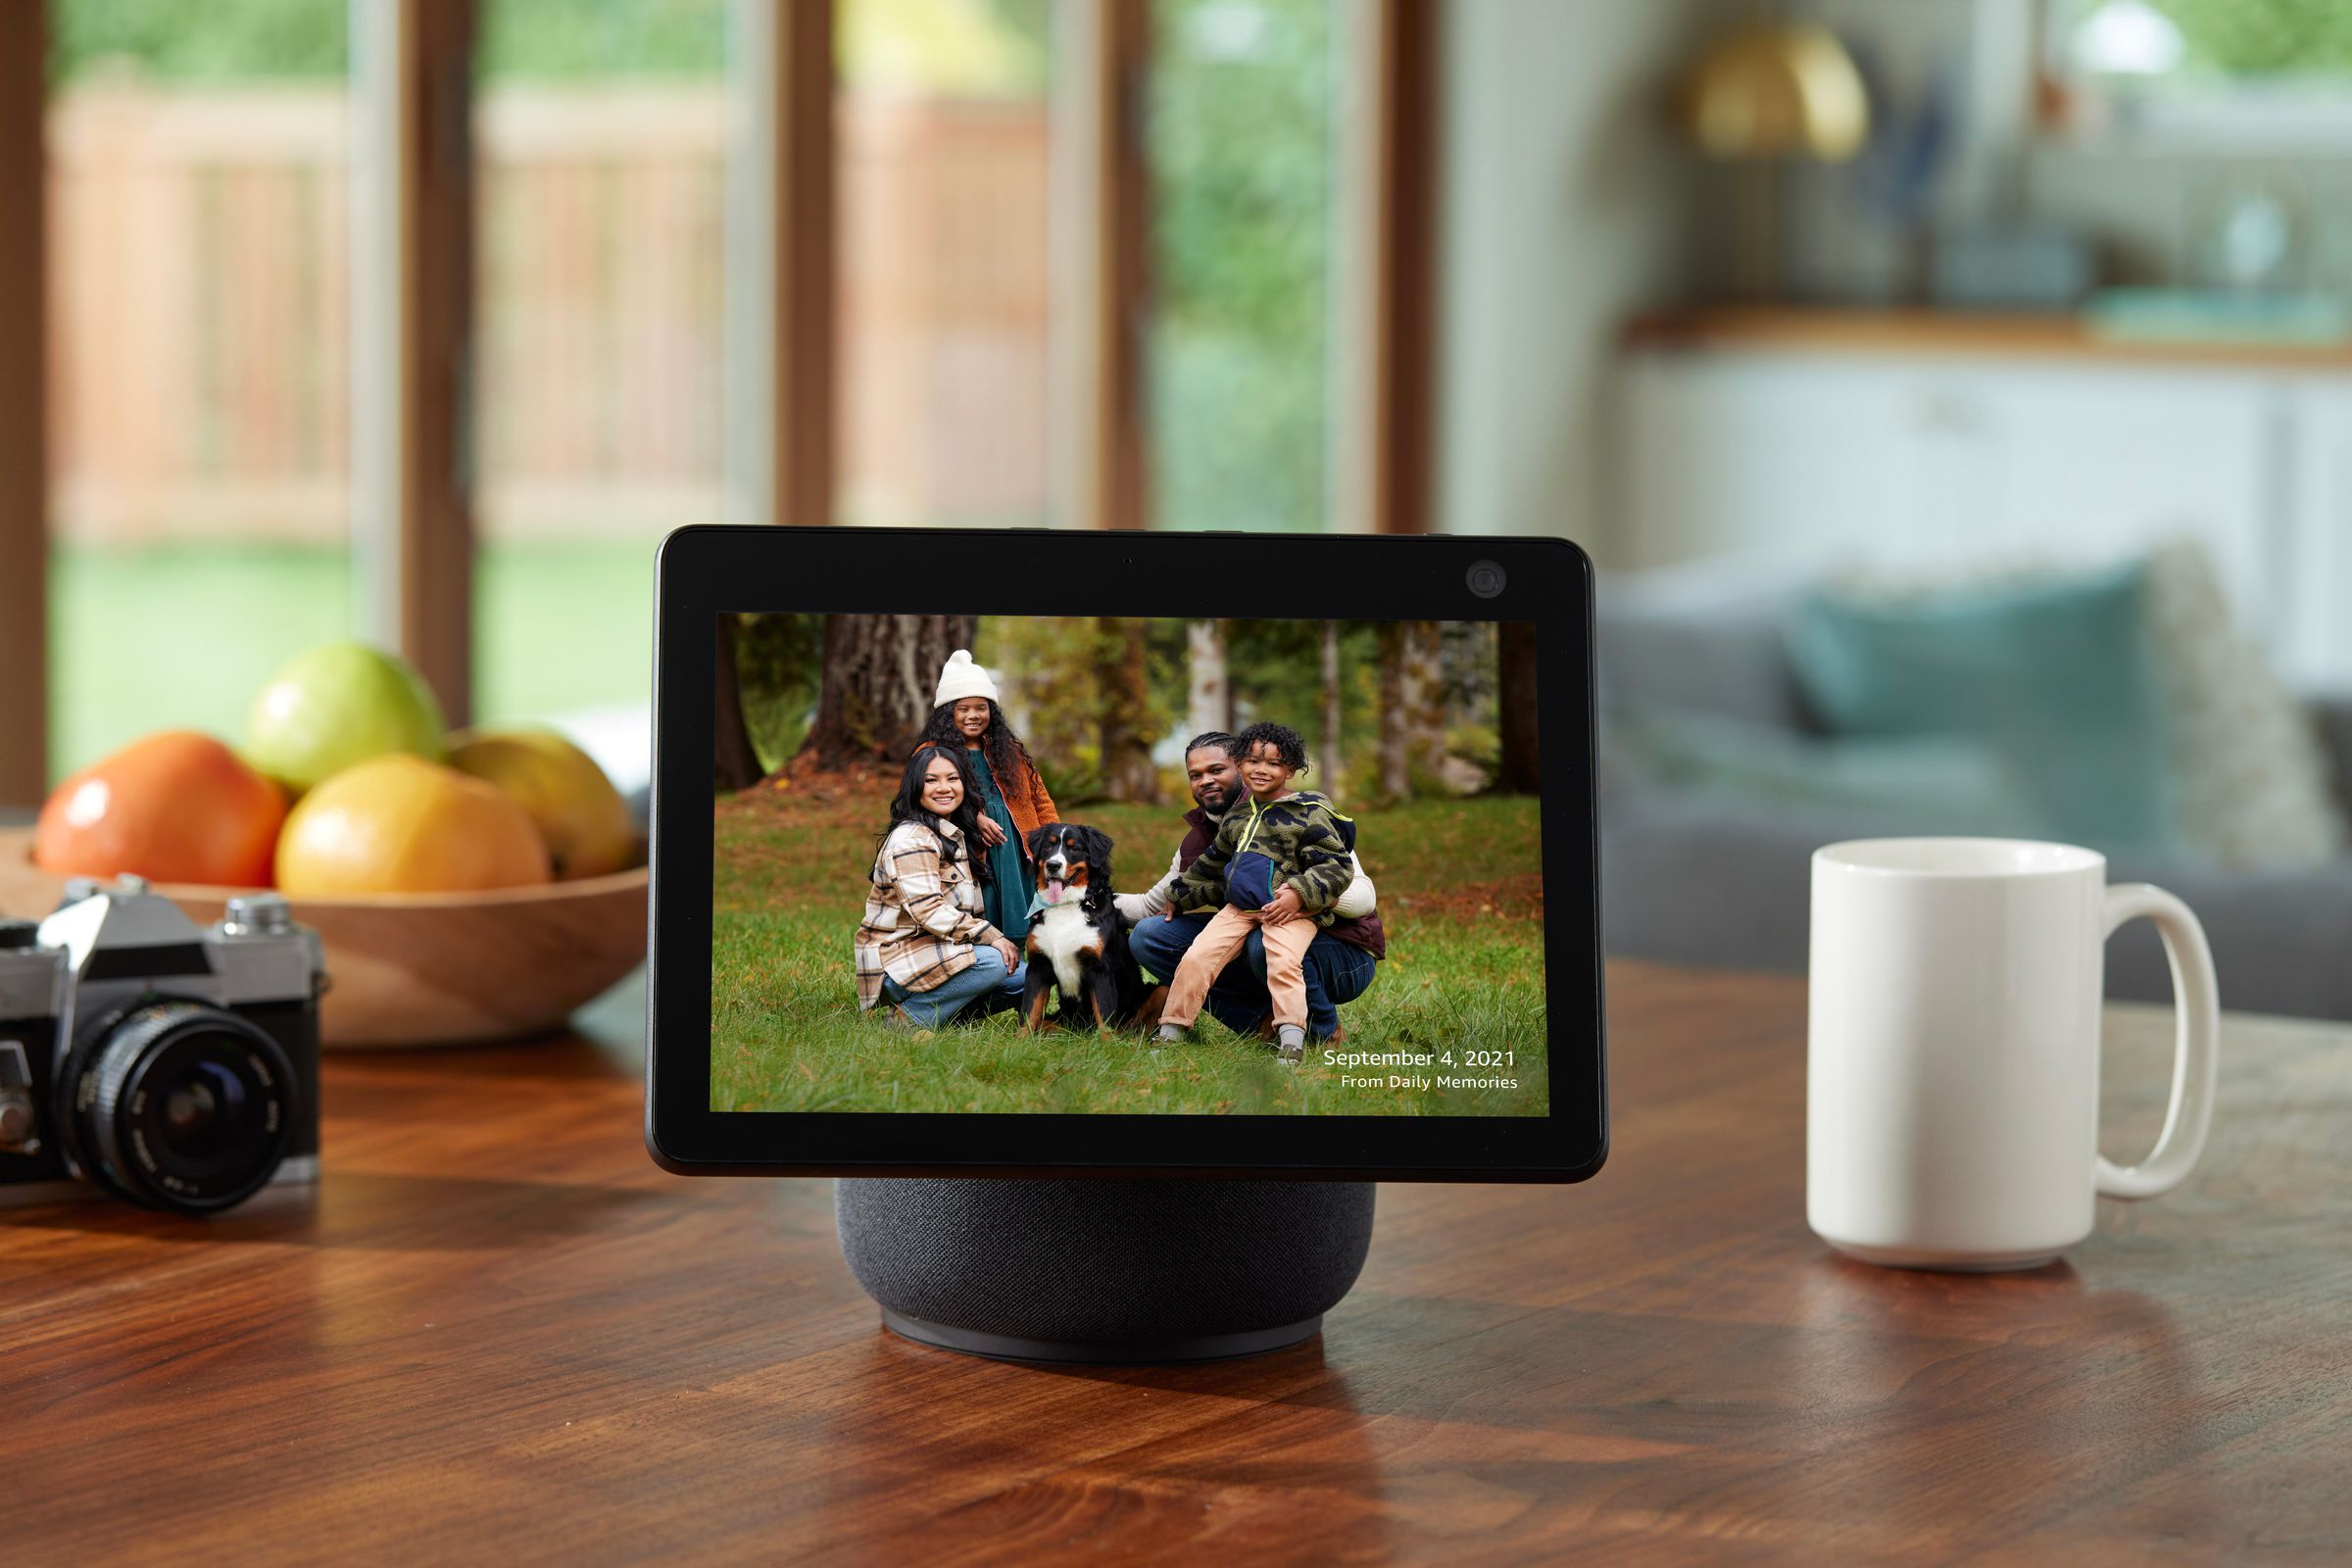 The new Photo Frame mode on Echo Show smart displays and Fire TVs removes ads and other clutter from your photo slideshow.